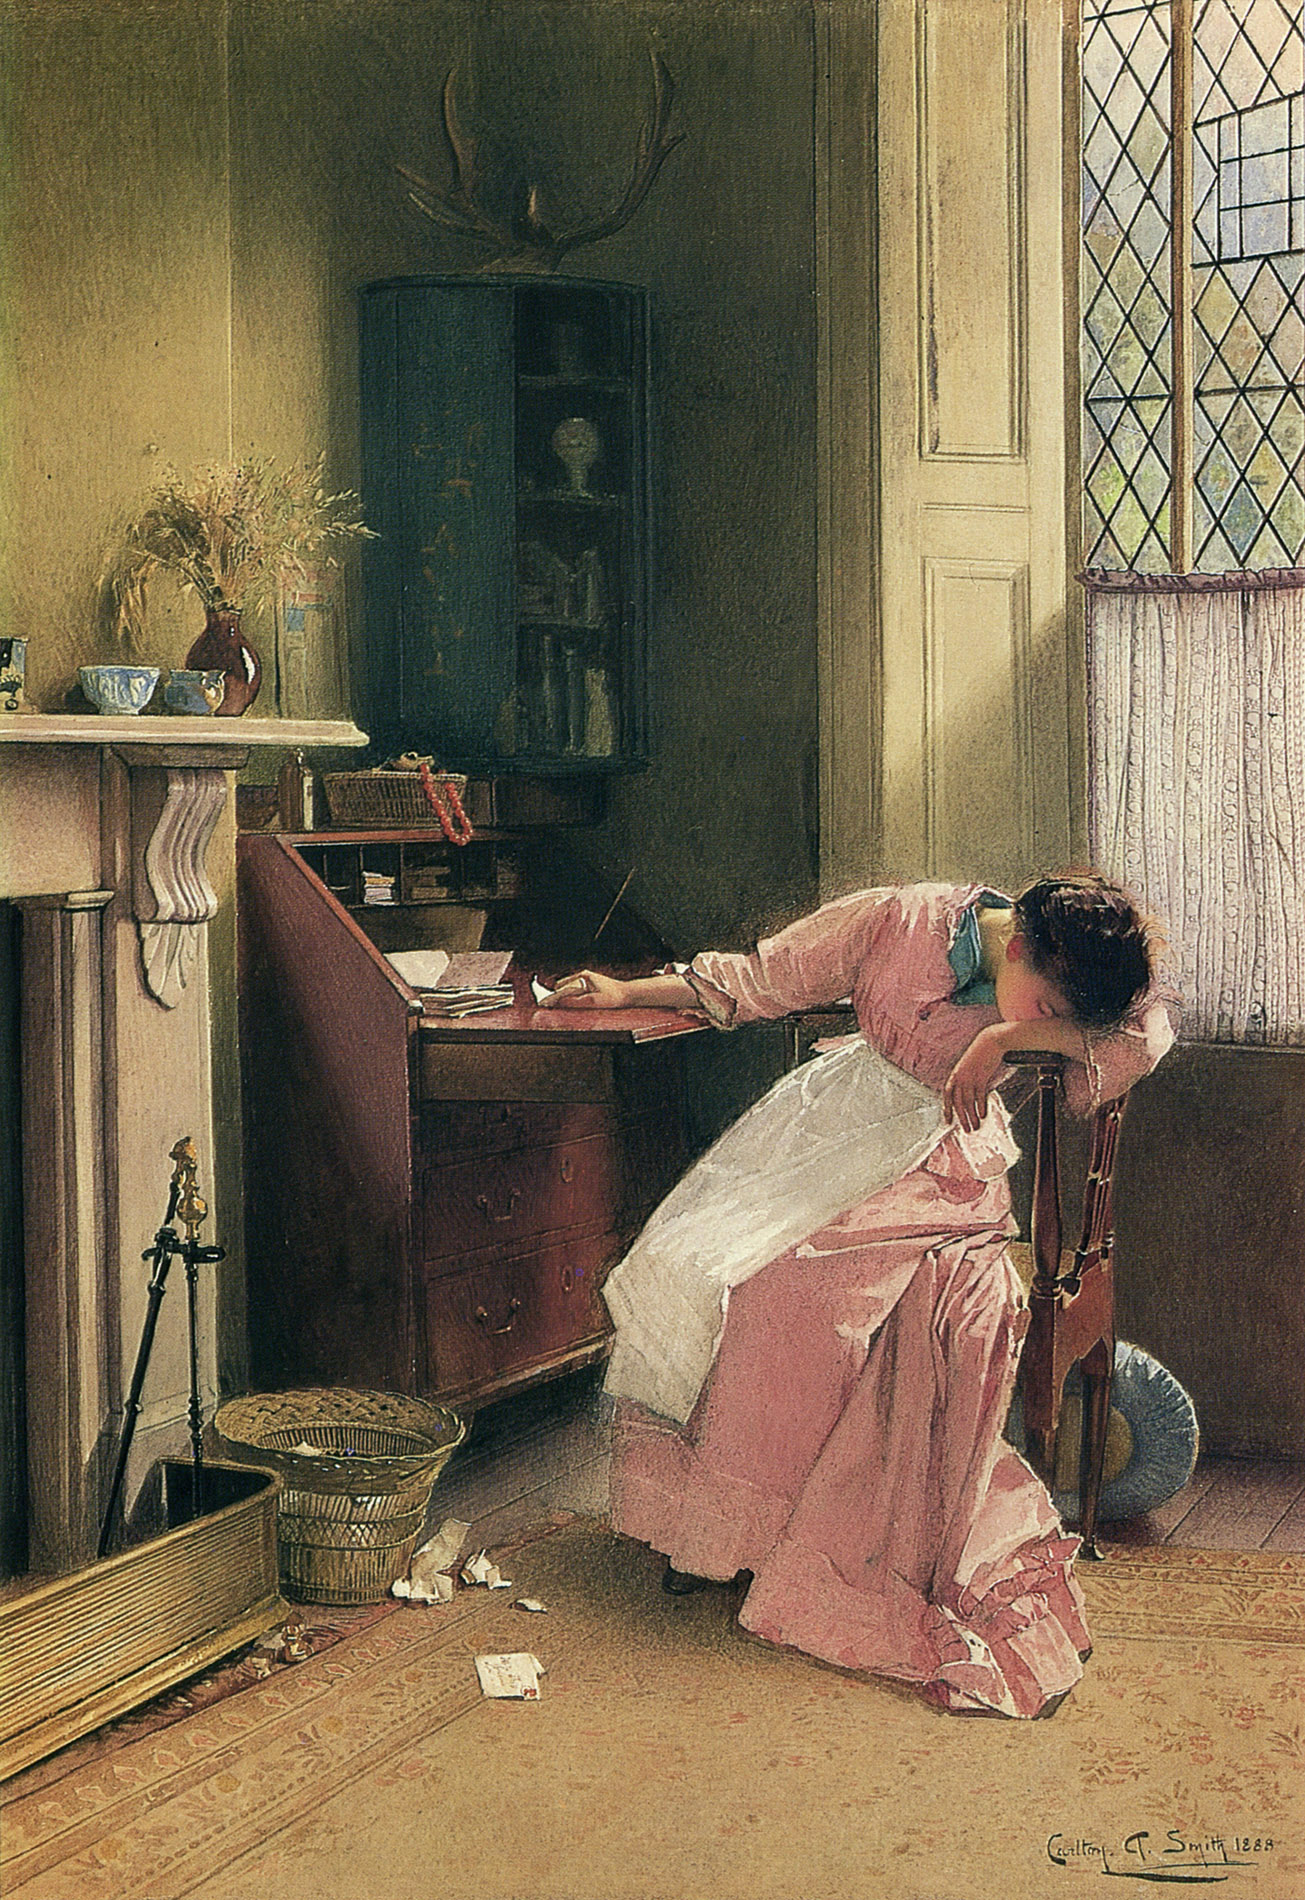 Carlton-Alfred-Smith-Recalling-the-Past-1888